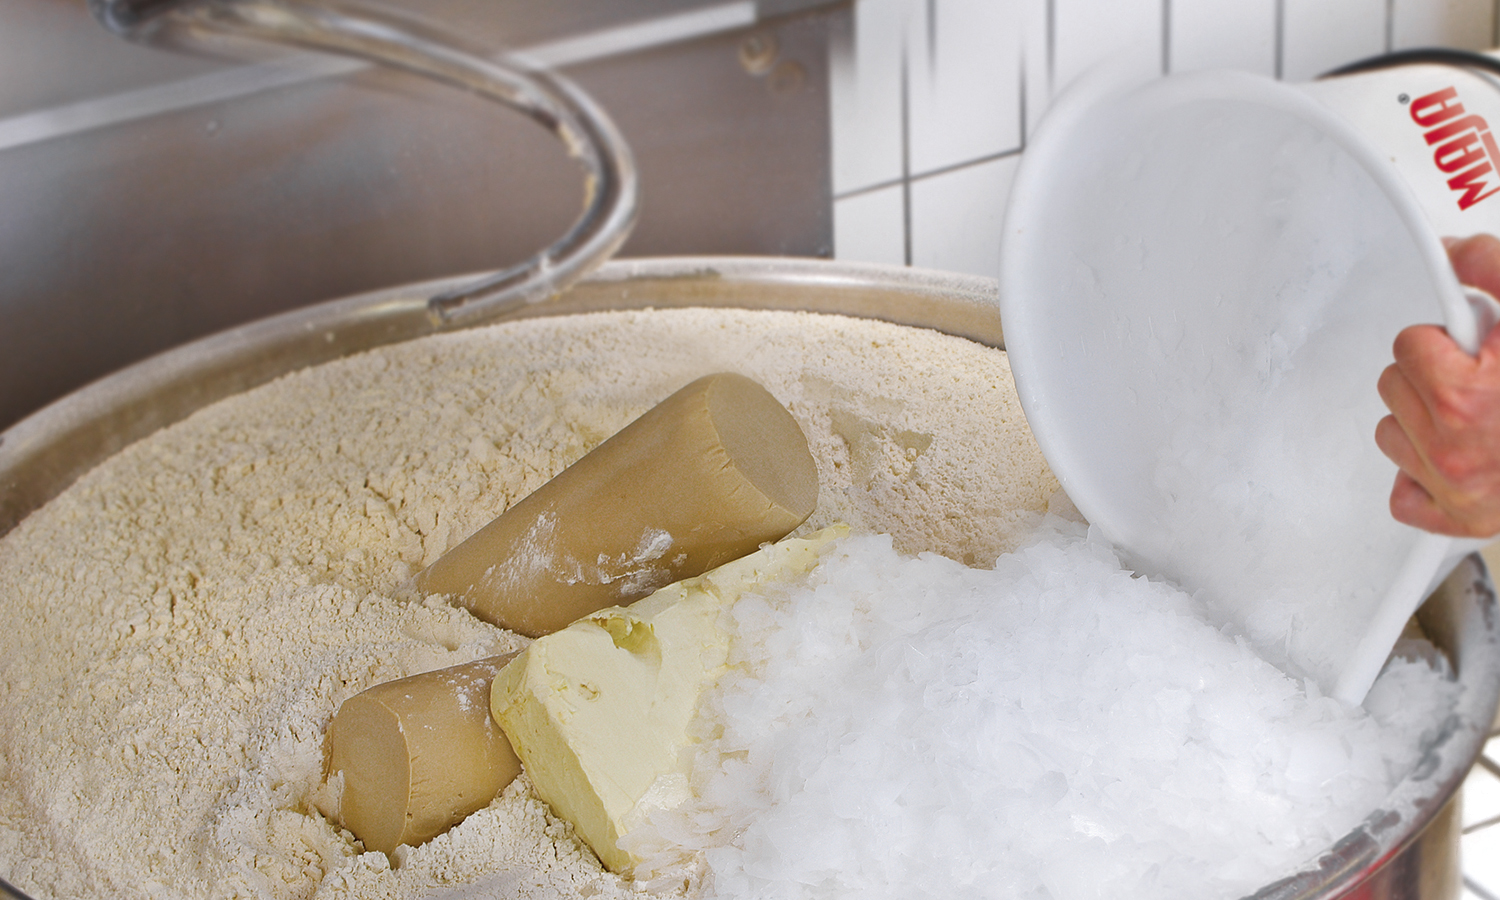 Bakeries and retail bakers use specific amounts of flake ice from a MAJA industrial ice maker to cool dough during mixing and kneading